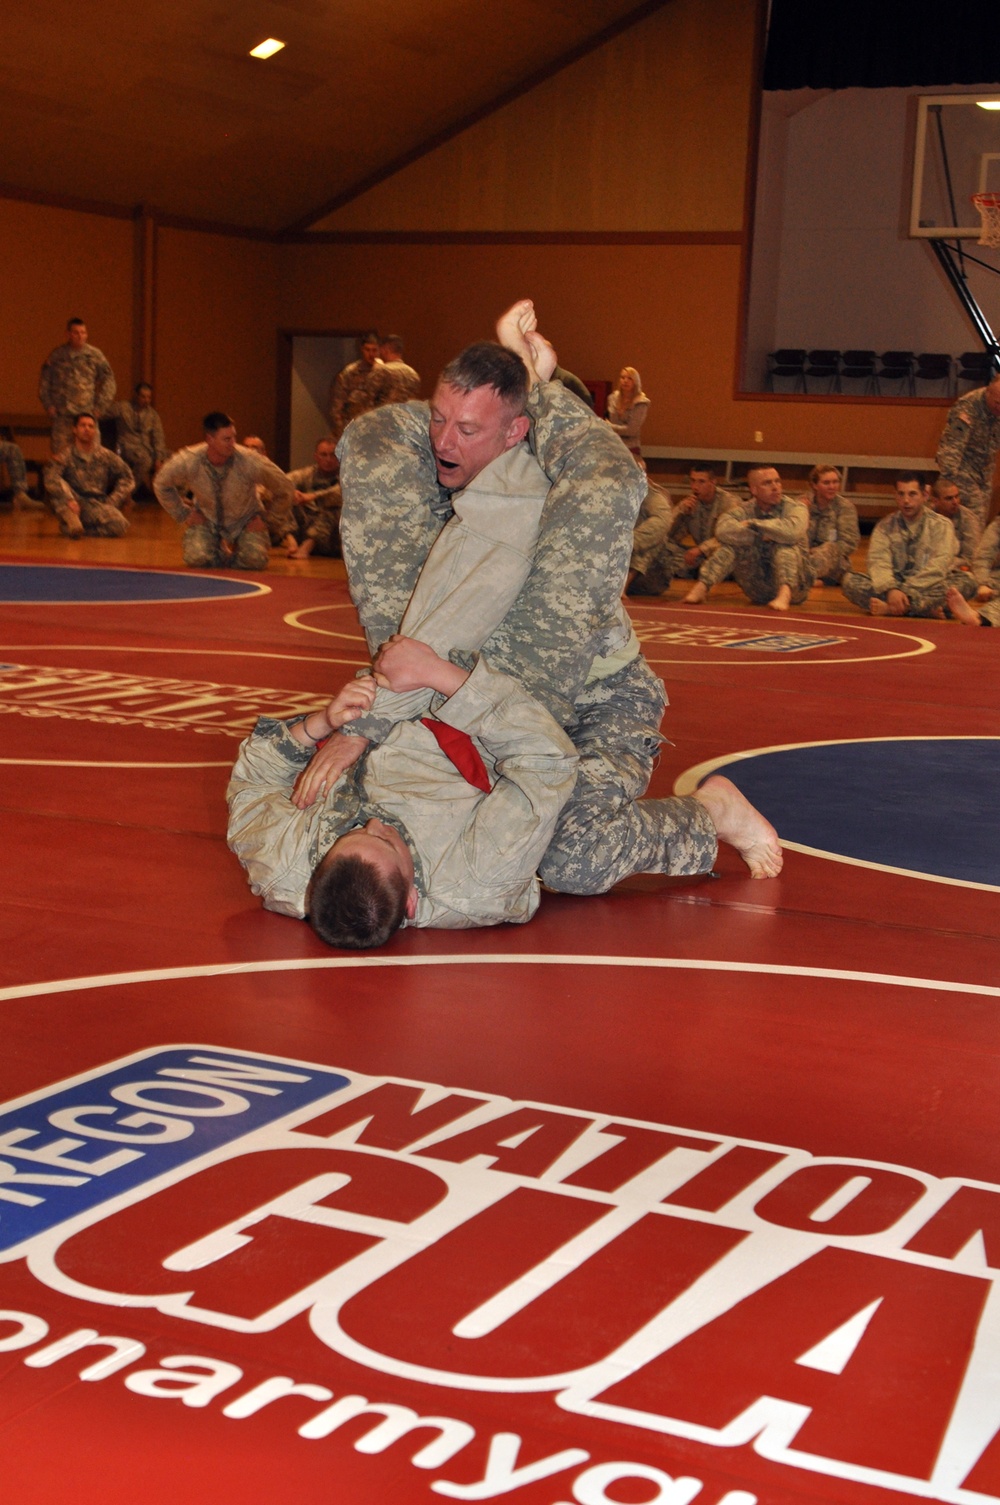 Oregon National Guard soldiers compete at Best Warrior challenge